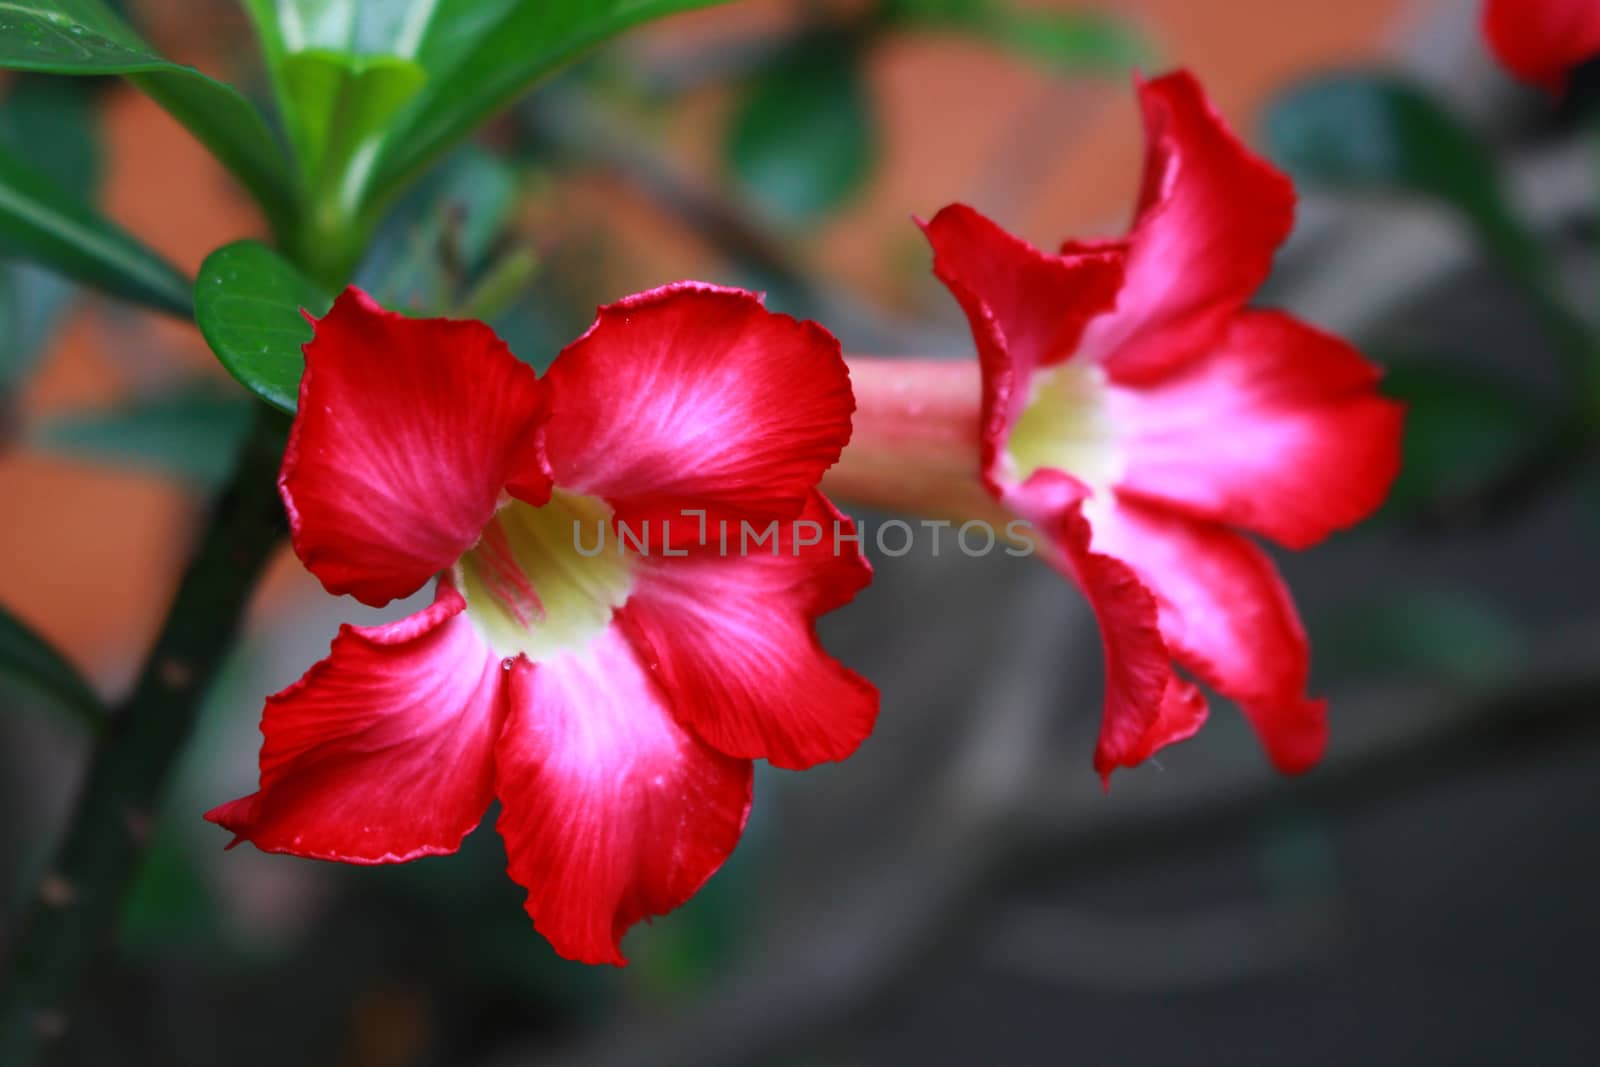 Desert Rose is the plant with colorful flowers. Wood is easy to grow More resistant to drought It has been referred to as Desert Rose.